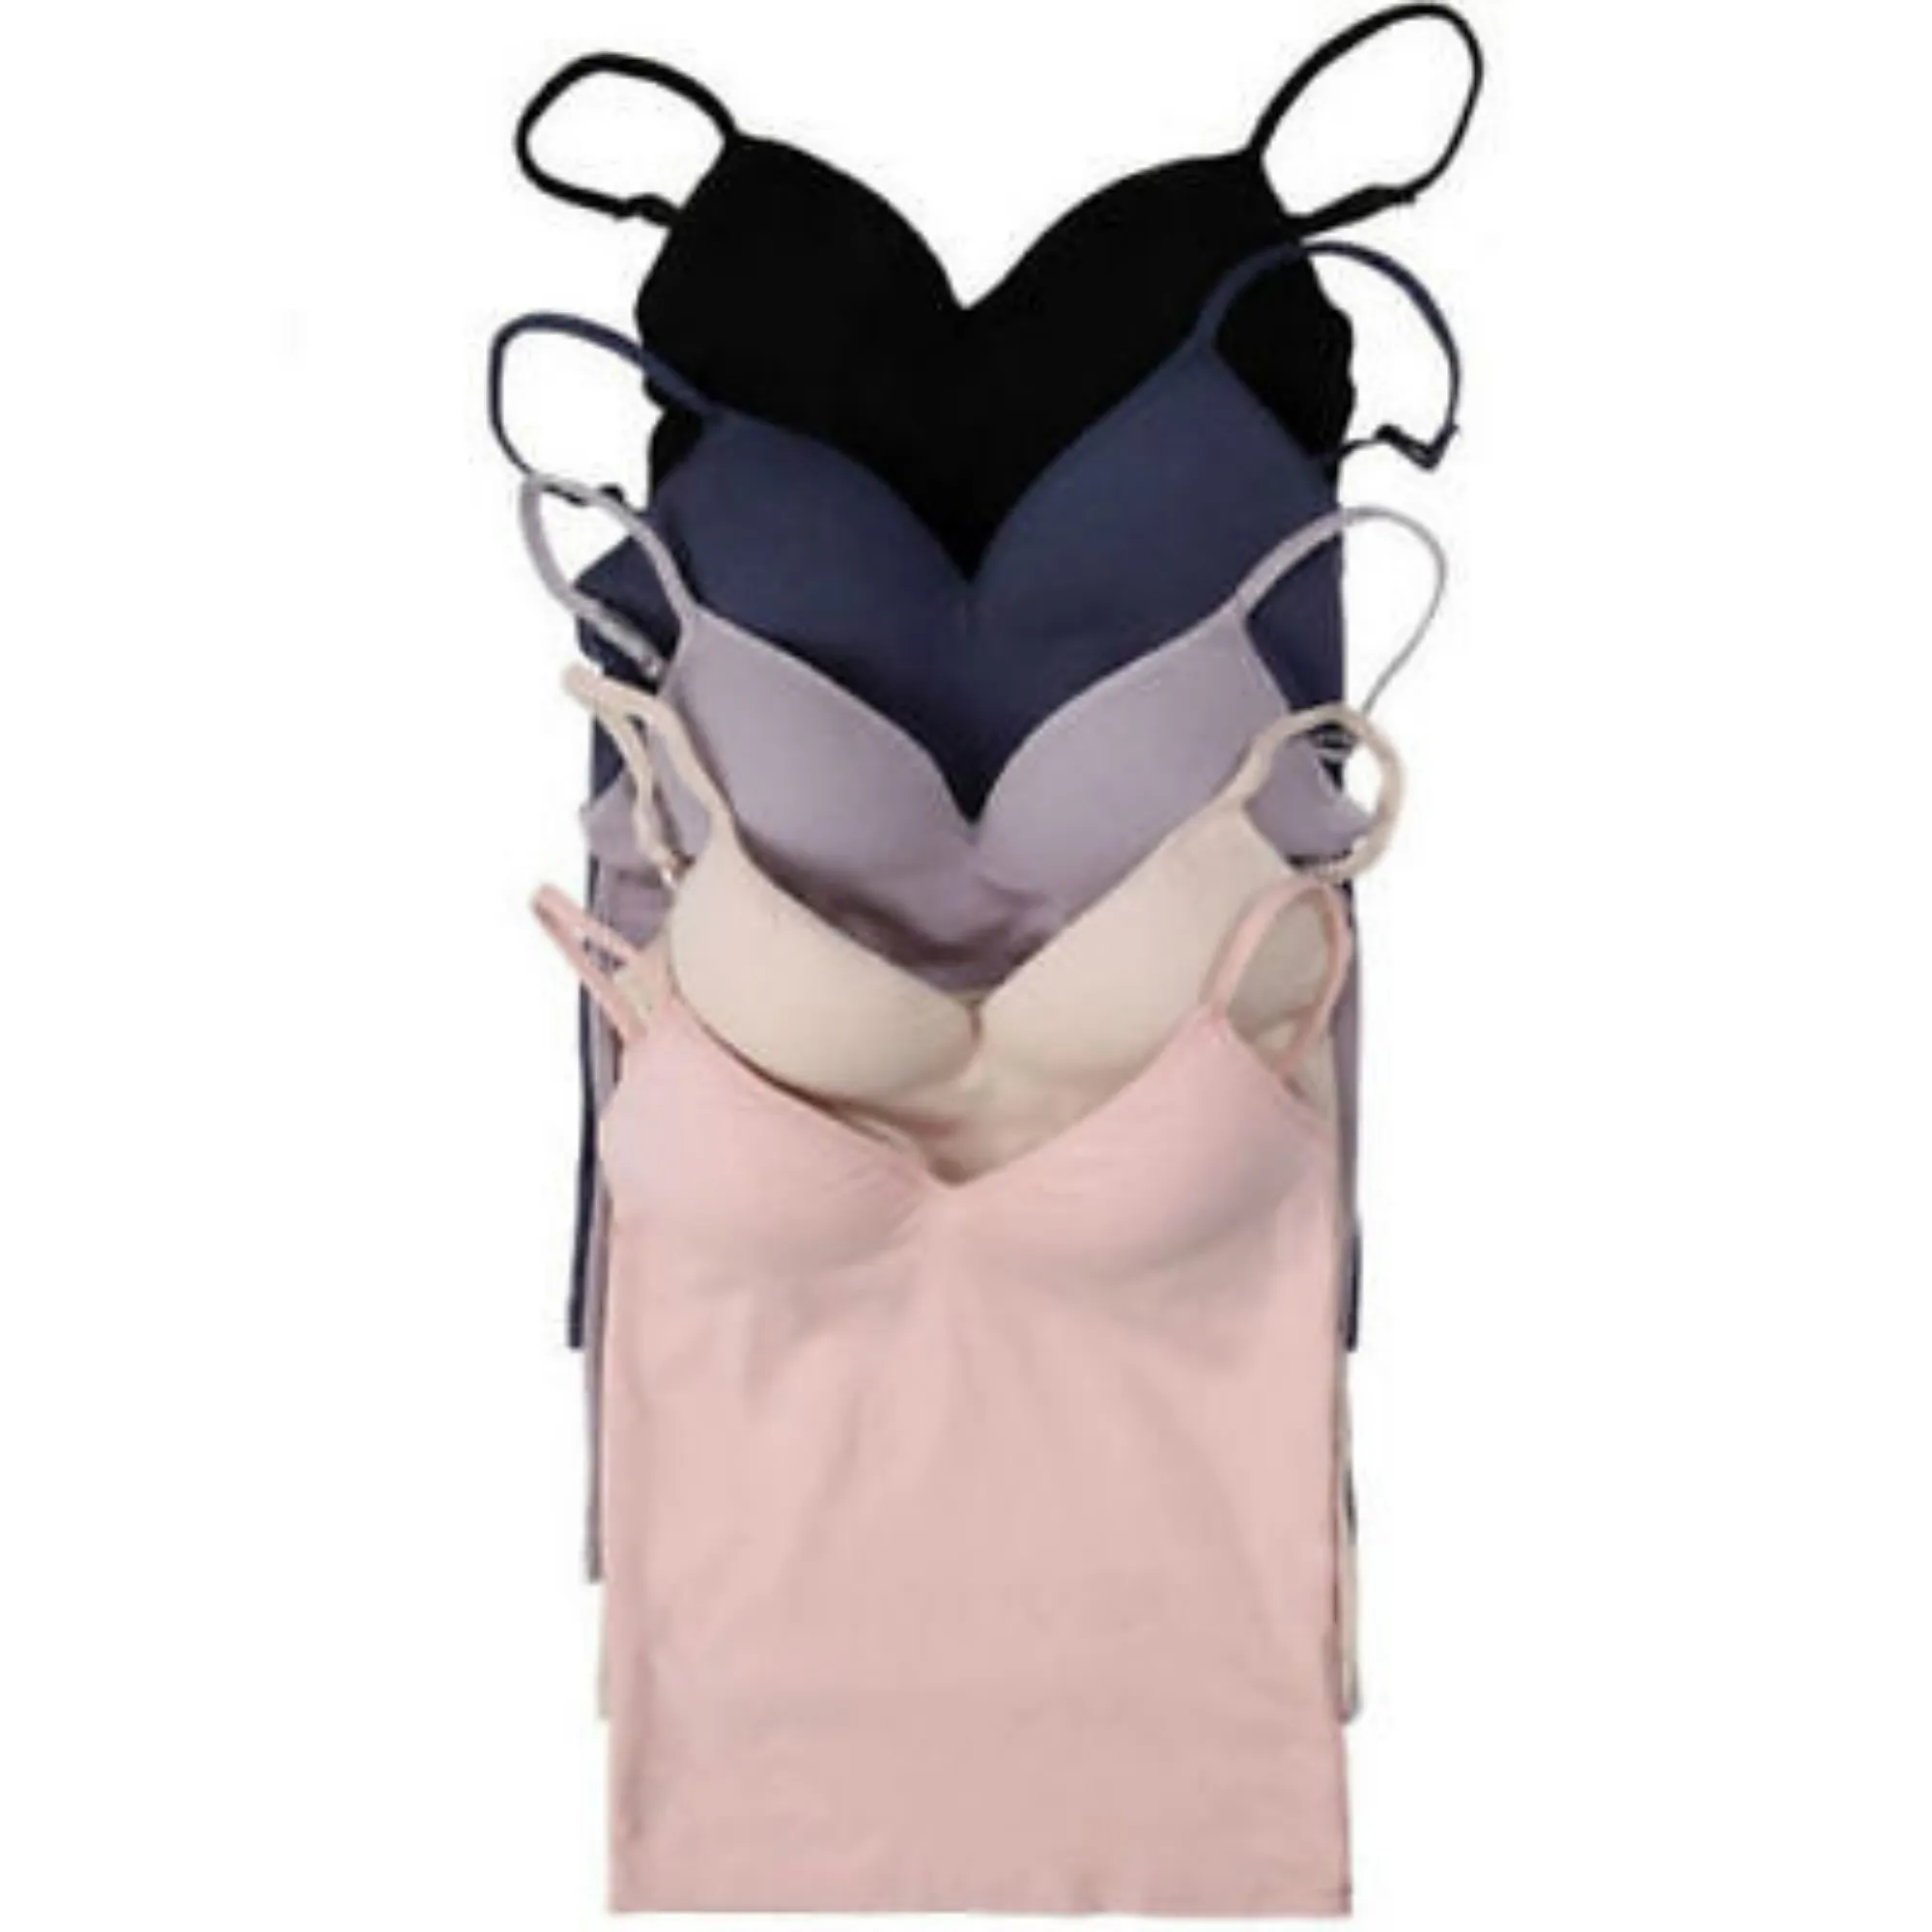 Sexy Padded Bra With Spaghetti Straps And Push Up Vest For Women Sleeveless  V Neck Tank Cami Top From Herish, $5.43